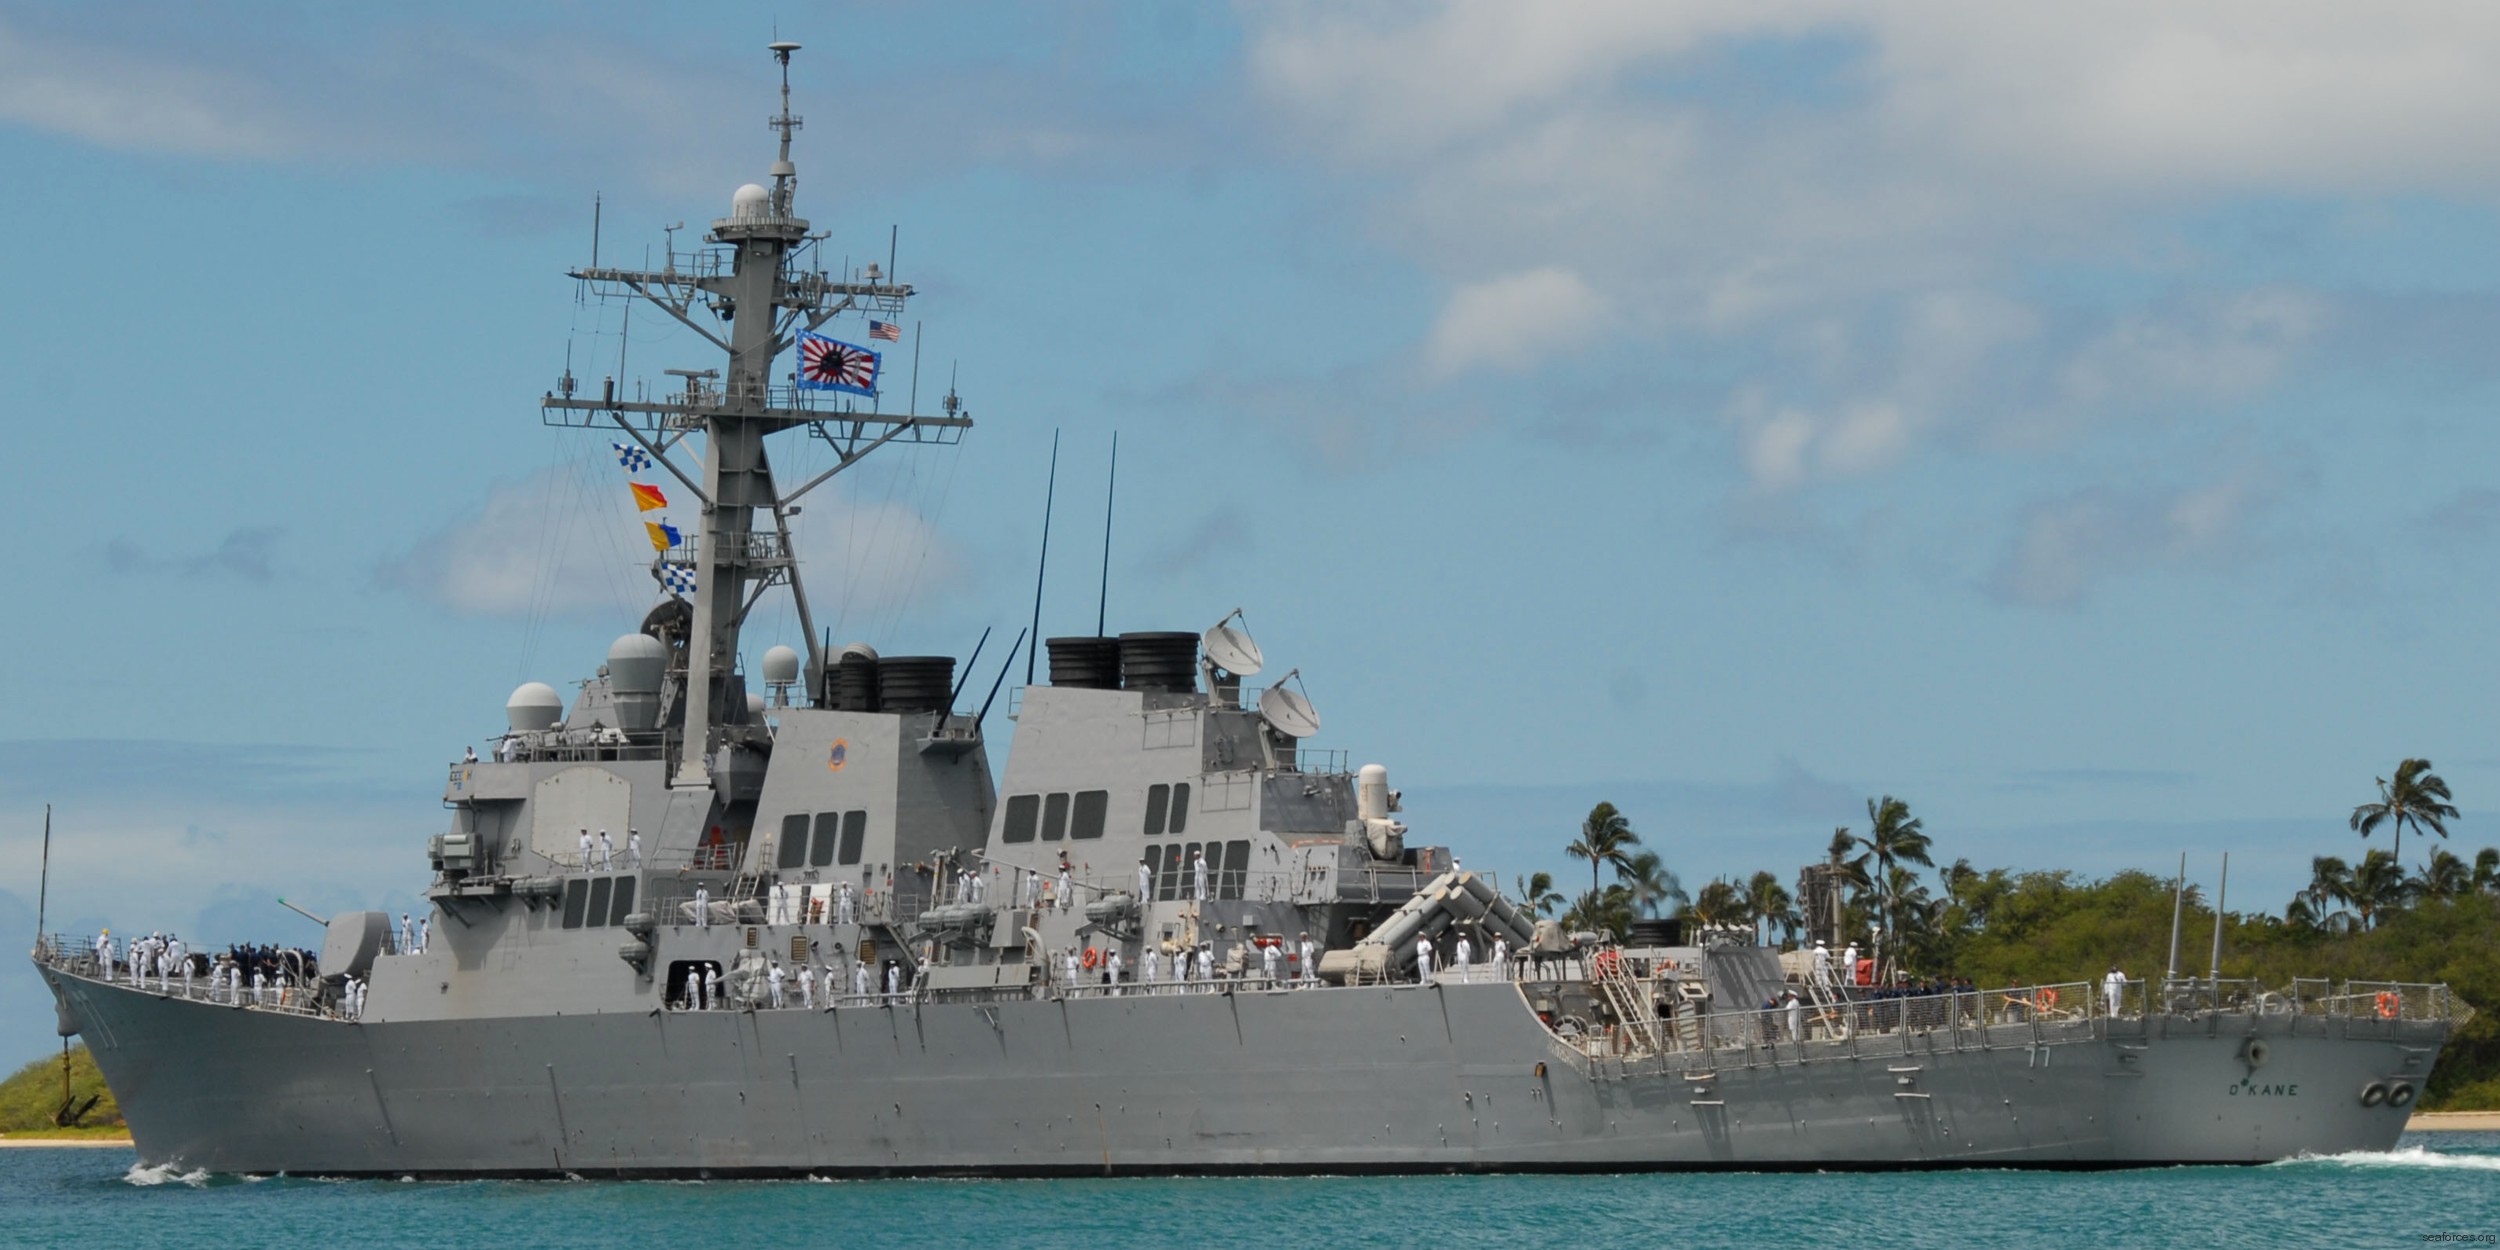 ddg-77 uss o'kane guided missile destroyer arleigh burke class navy aegis 32 joint base pearl harbor hickam hawaii